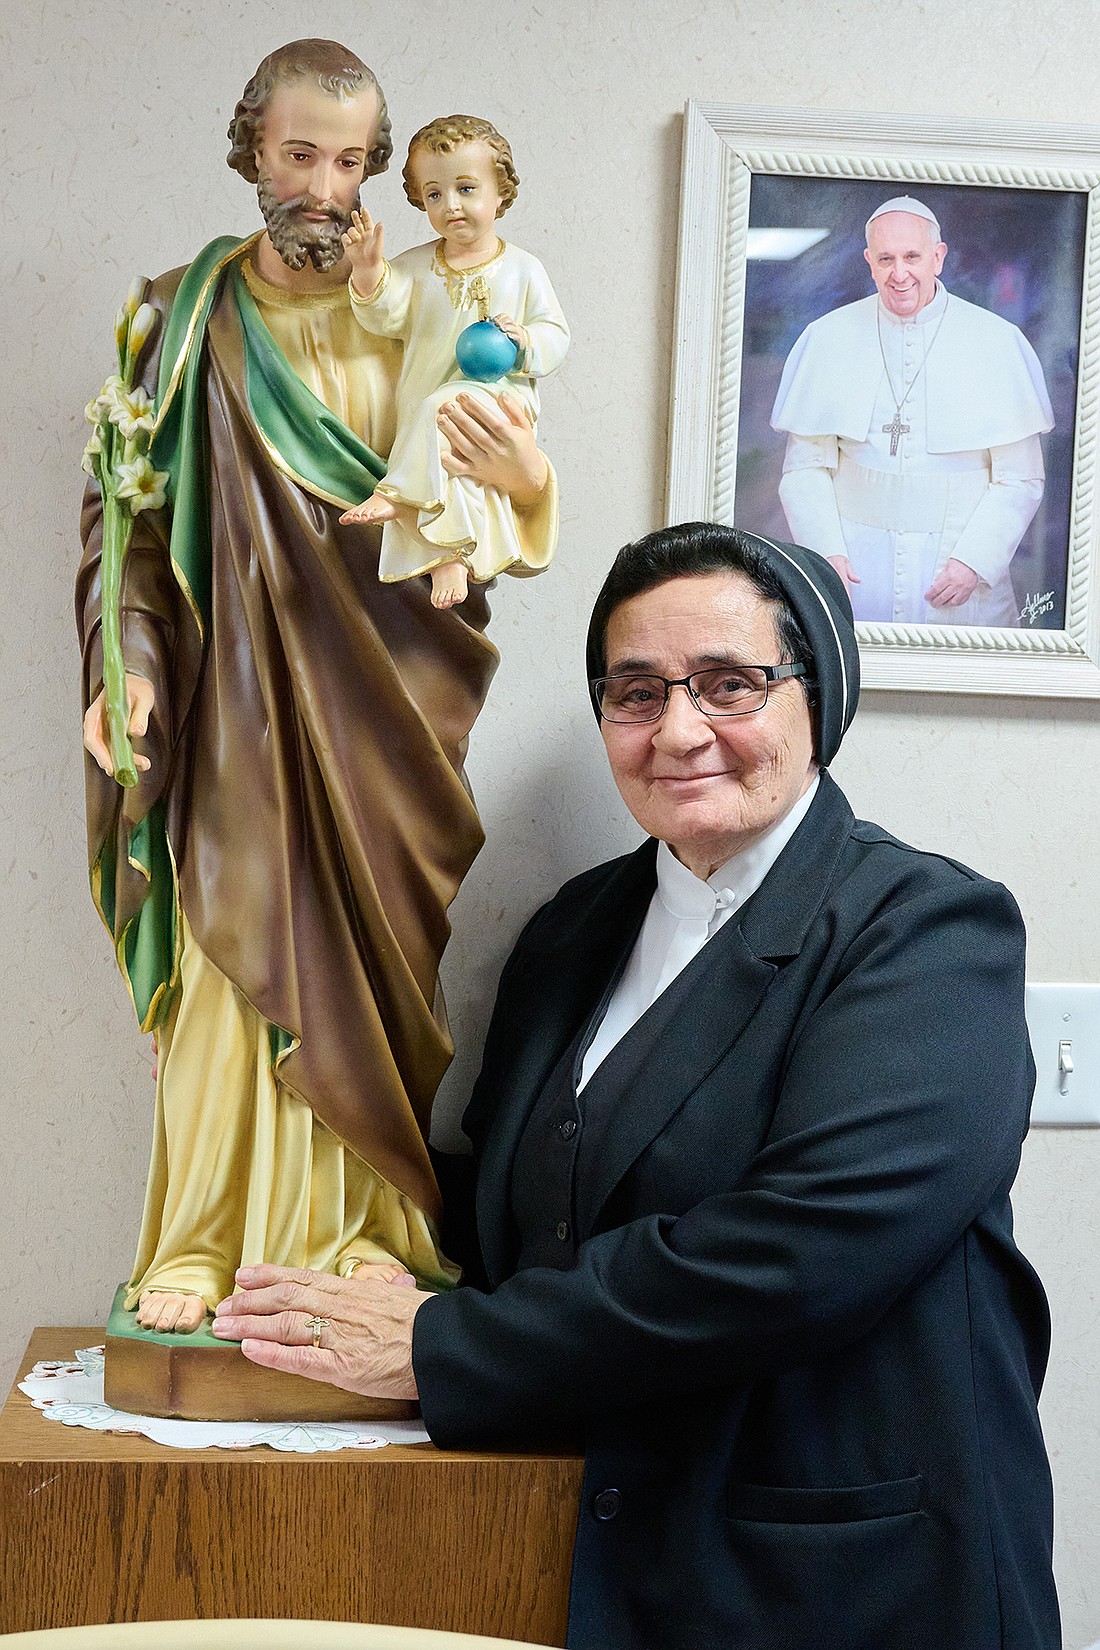 Sister Brunilda Ramos stands with a statue of St. Joseph, the saint to whom she turns over all in prayer, in the St. Joseph by the Sea Retreat House. Mike Ehrmann photo